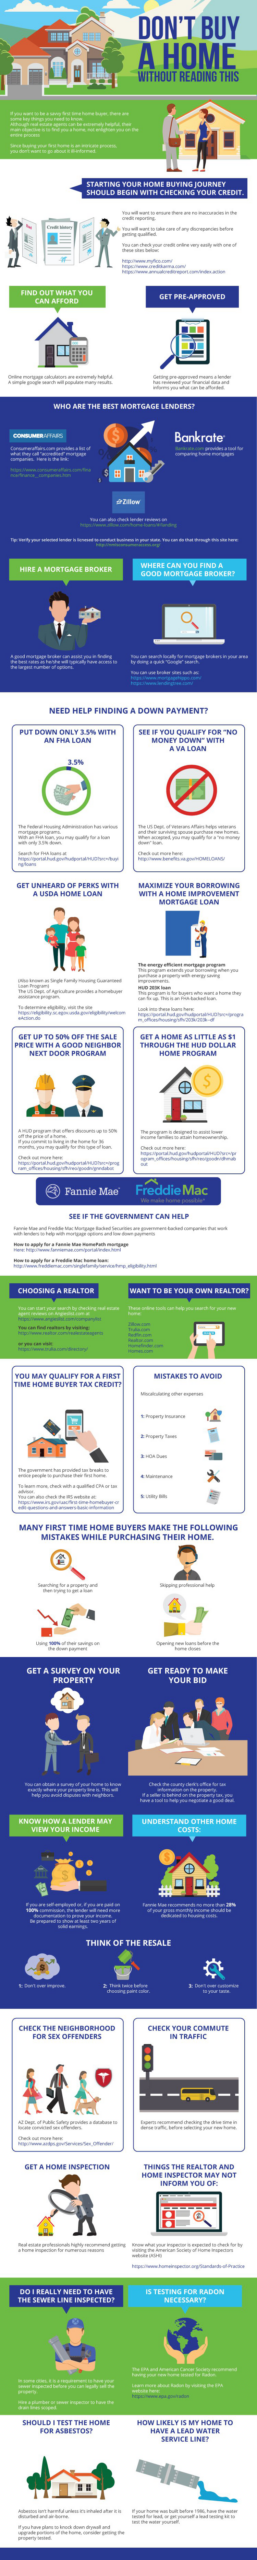 Infographic - Don’t Buy a Home Without Reading This